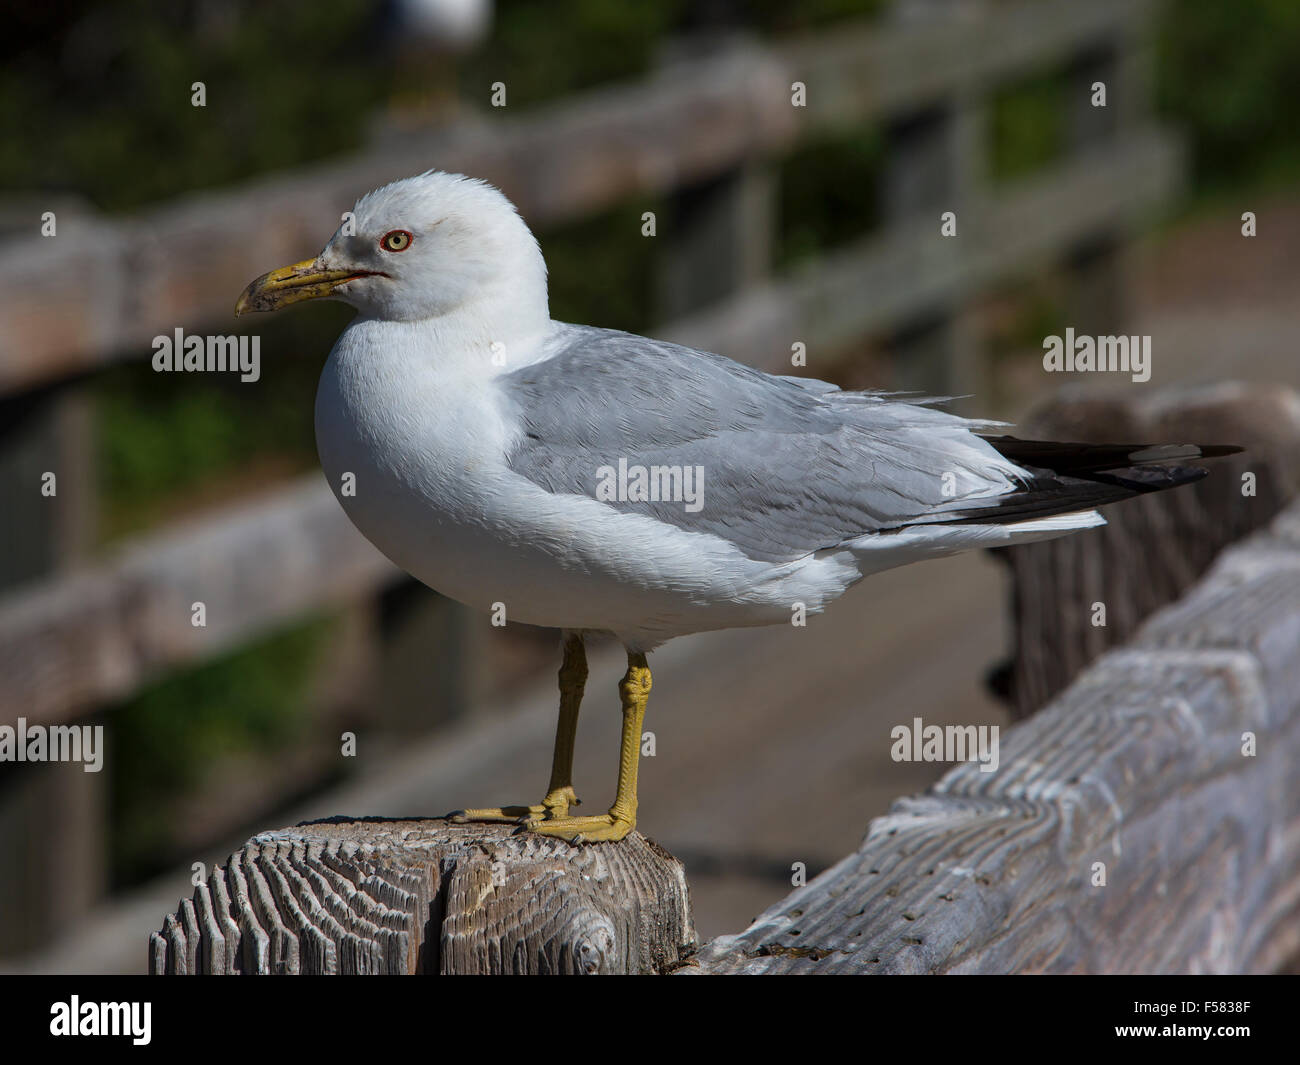 Bird, Seagull rests on river fence post in forest. Stock Photo